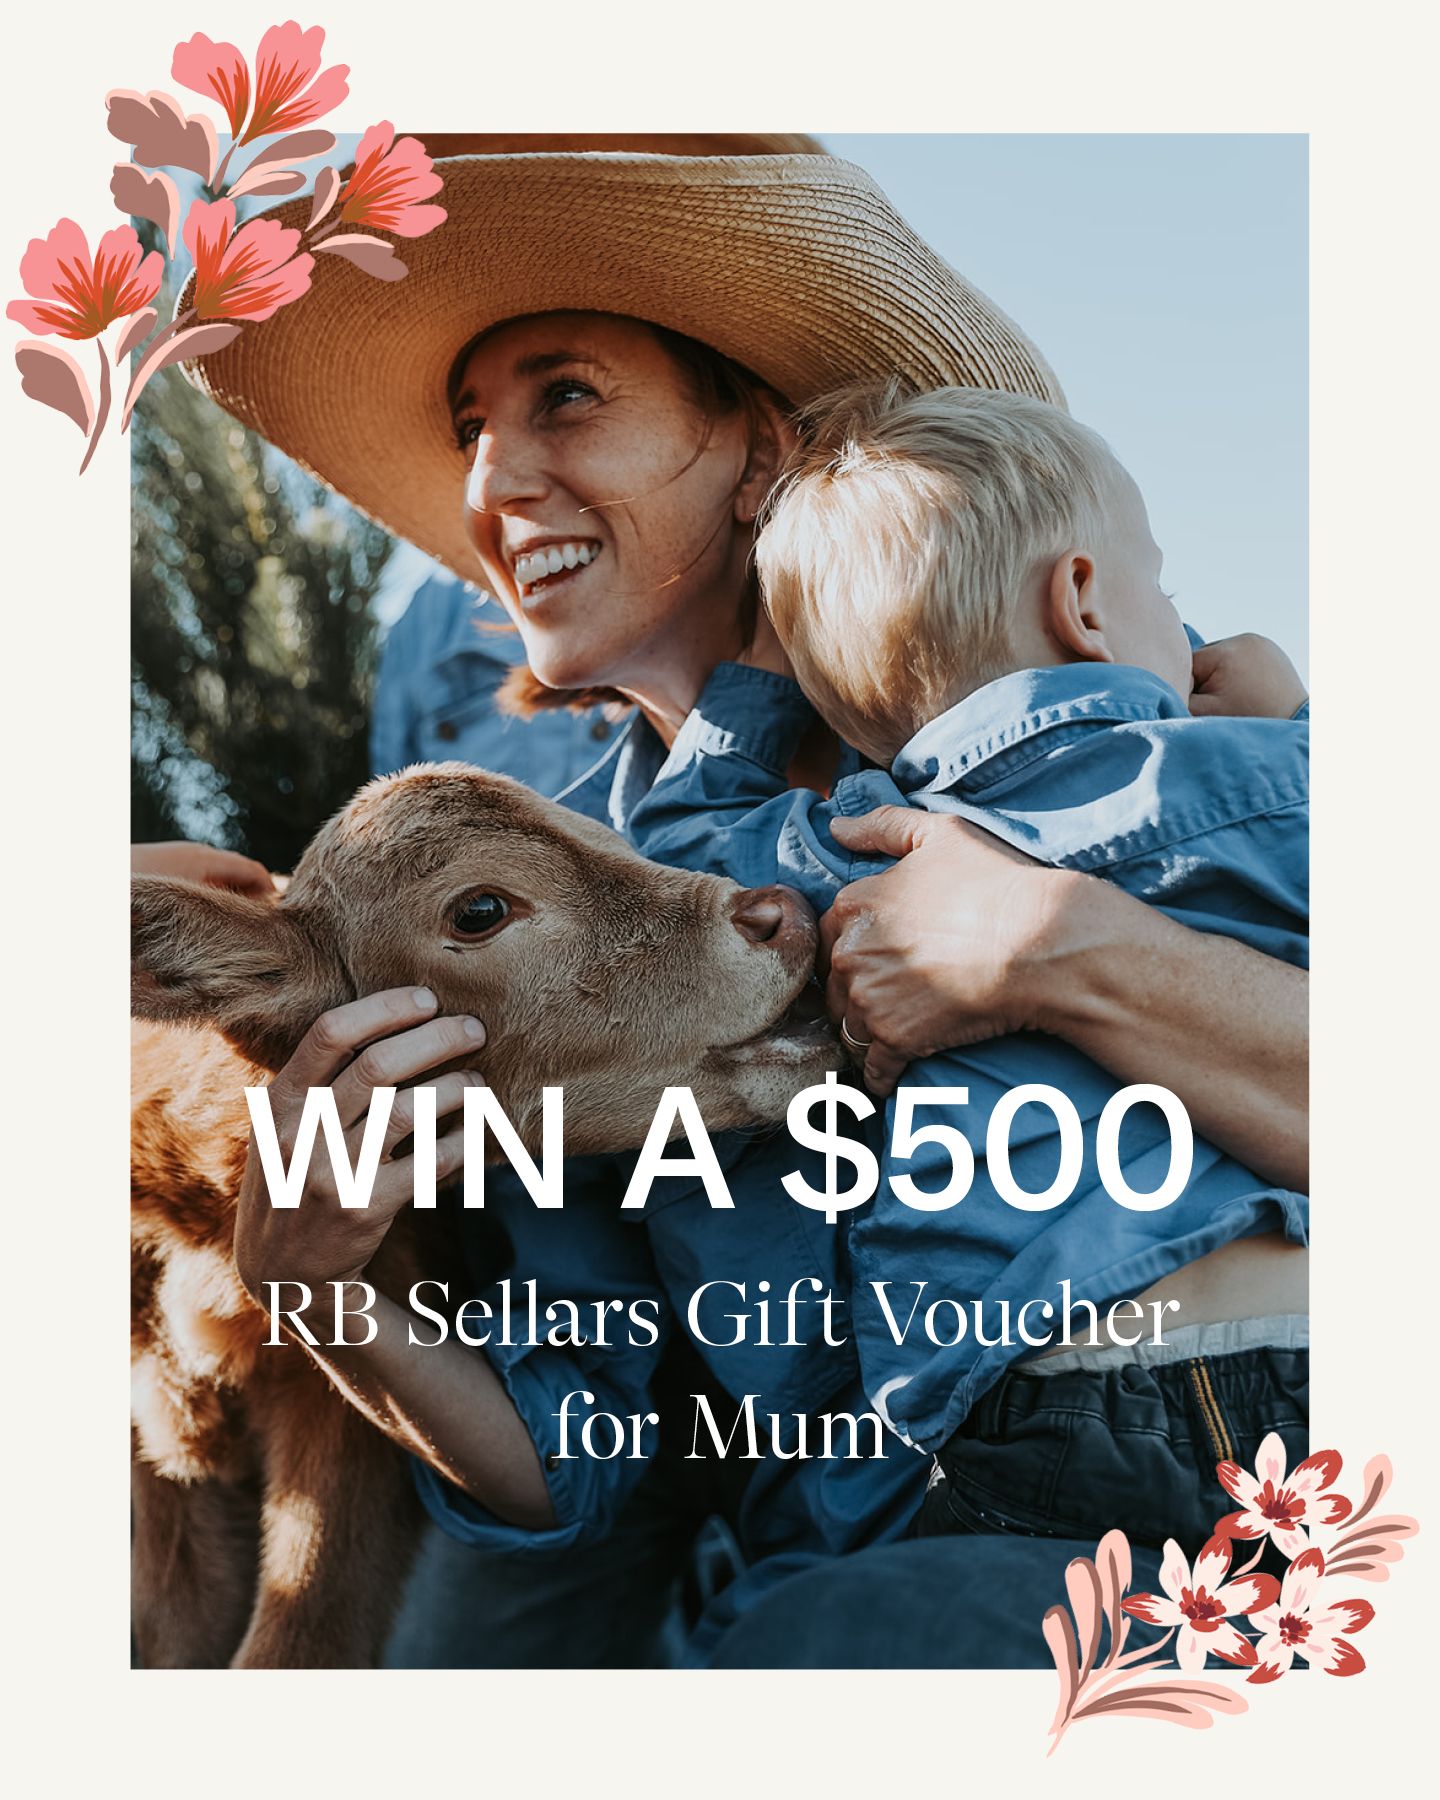 Win a $500 RB Sellars Voucher for Mum!
 
We are giving away a $500 RB Sellars Gif...
 
How to enter:
 
1. Like this post
2. Tag two friends (more comments = more entries)
3. Ensure you are following @rb_sellars
 
+ Bonus entries for those who share this post to their stories

Entries close at 11:59pm AEST Sunday 5th May 2024. Winner will be notified by direct message Monday 6th May 2024.
 
Please note, this is the offical and only RB Sellars account. You will only be notified by @rb_sellars. We will not ask you for any banking details or personal information. All other pages are fakes.
 
Open to Australian residents only. This competition is not sponsored, endorsed or administered, or associated with Instagram.
 
#RBSellars #MothersDay